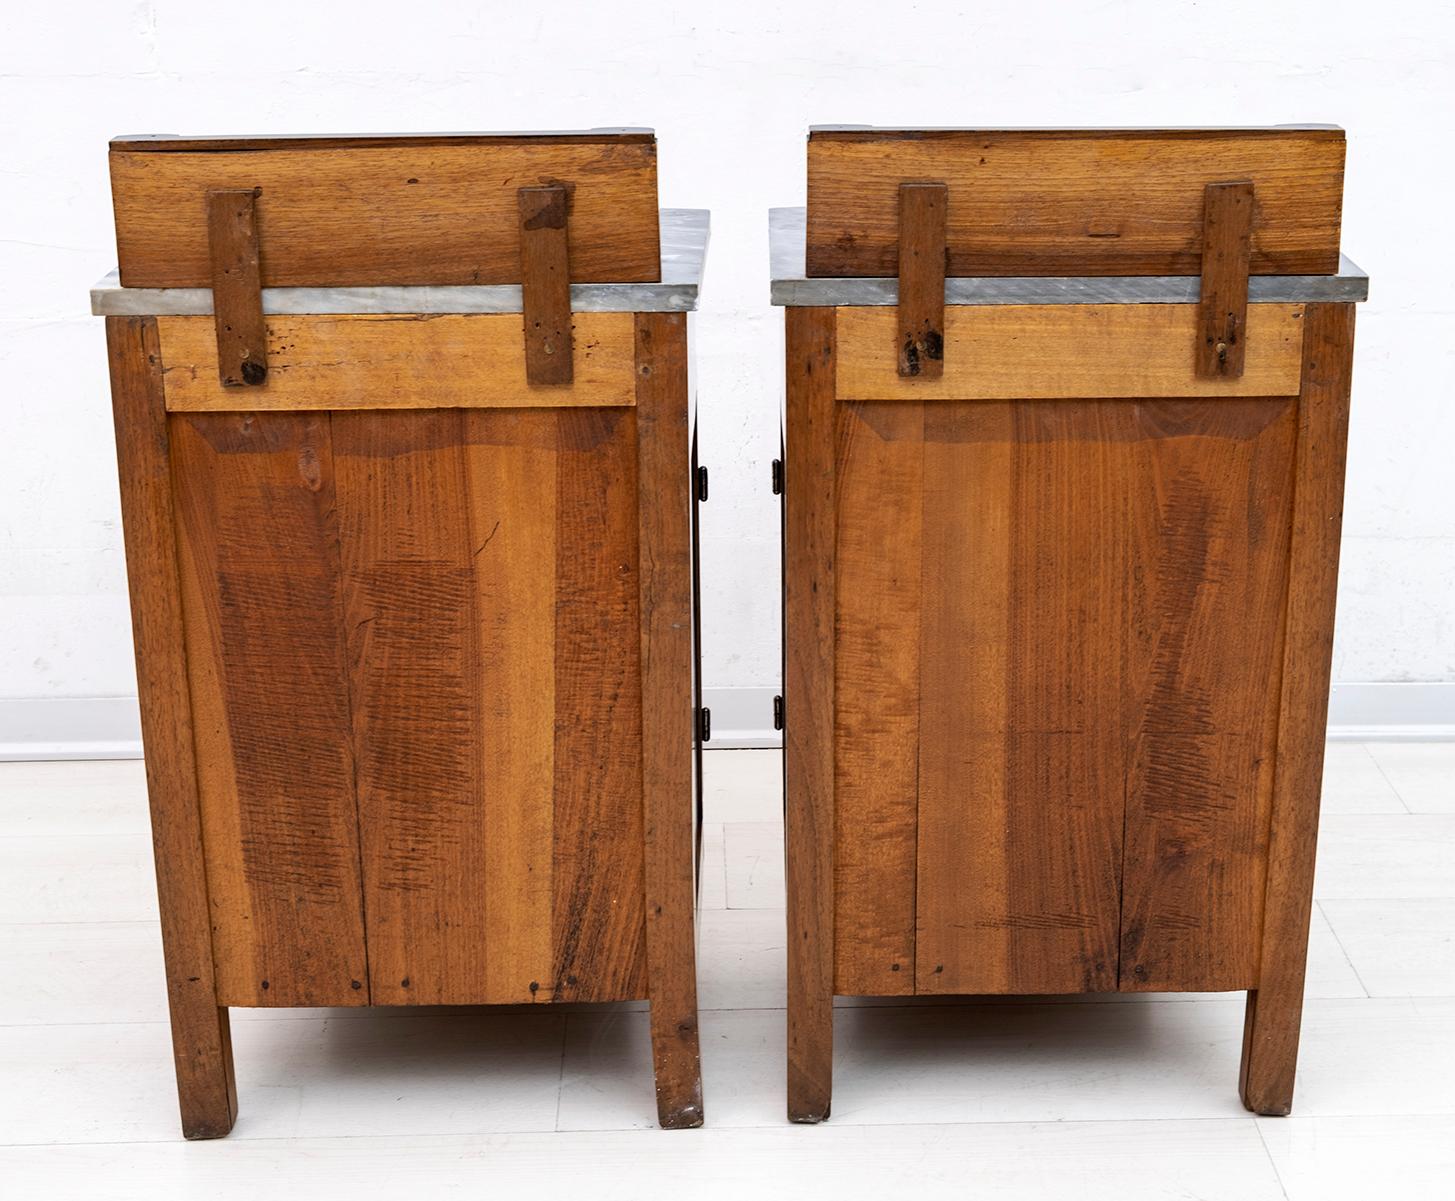 Pair of Art Dèco Italian Walnut and Grafite Gray Marble Bedside Tables, 1920s For Sale 3